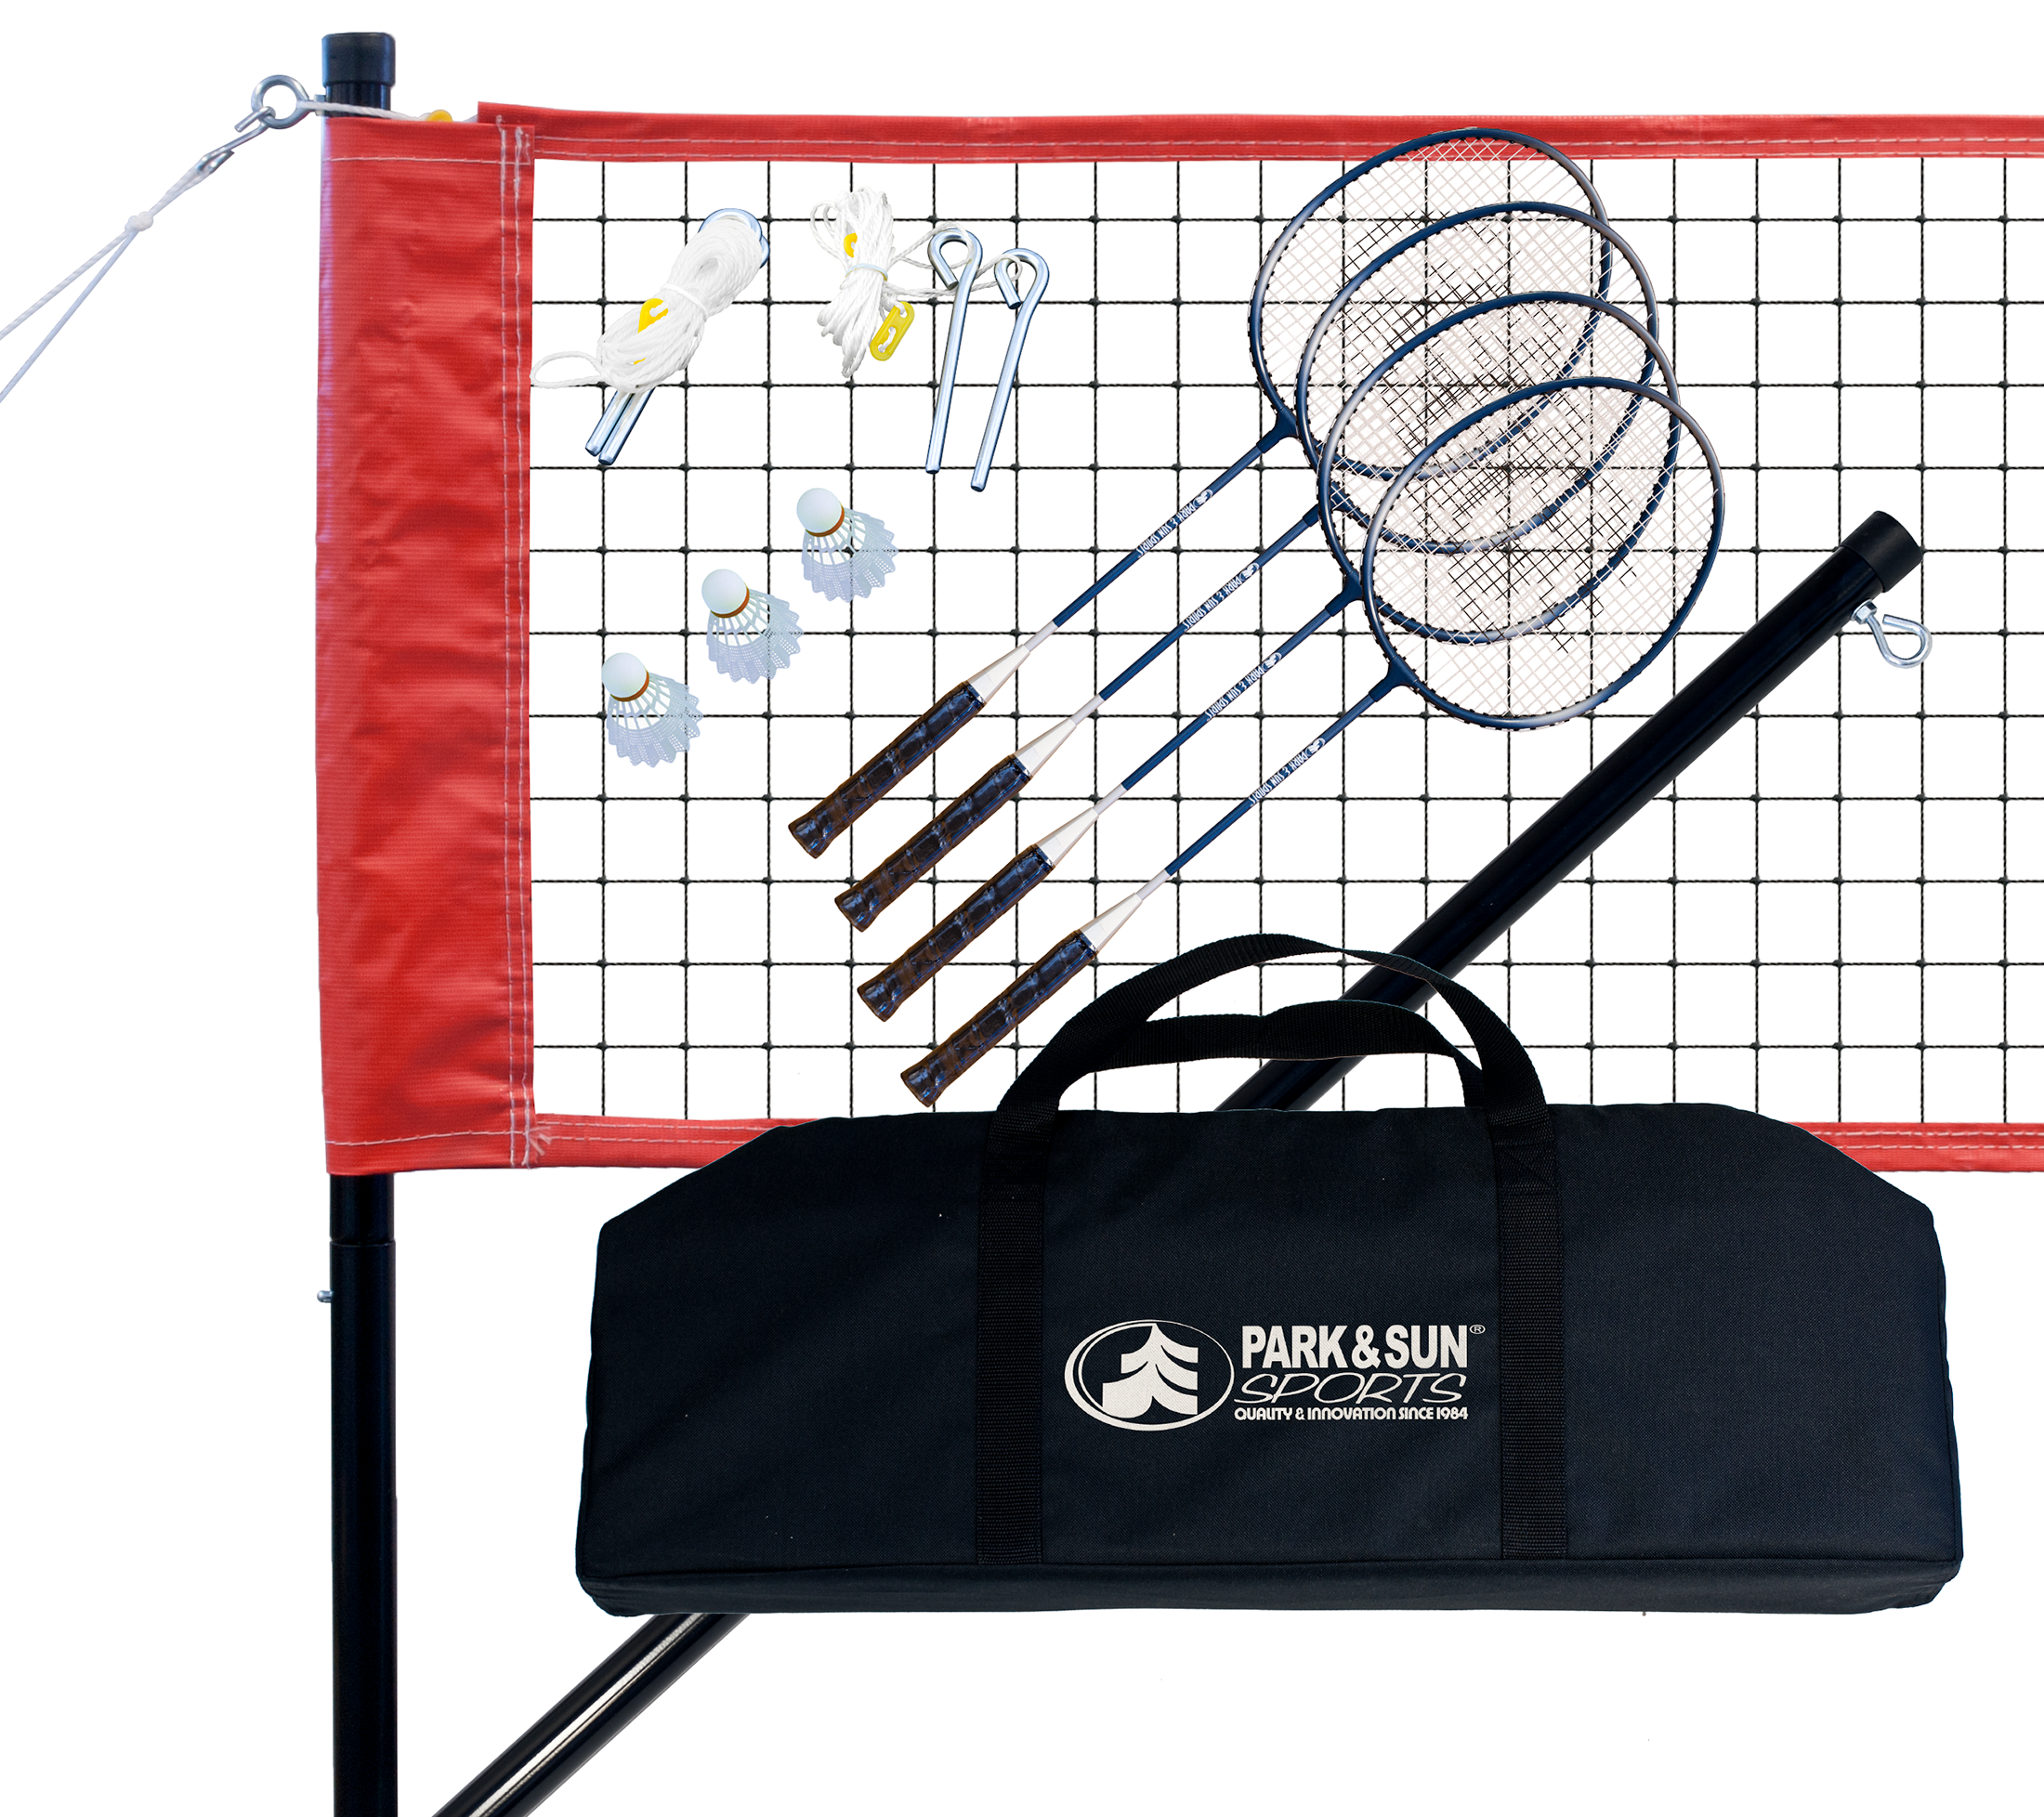 Tournament Series Park & Sun Sports Portable Indoor/Outdoor Badminton Net System with Carrying Bag and Accessories 